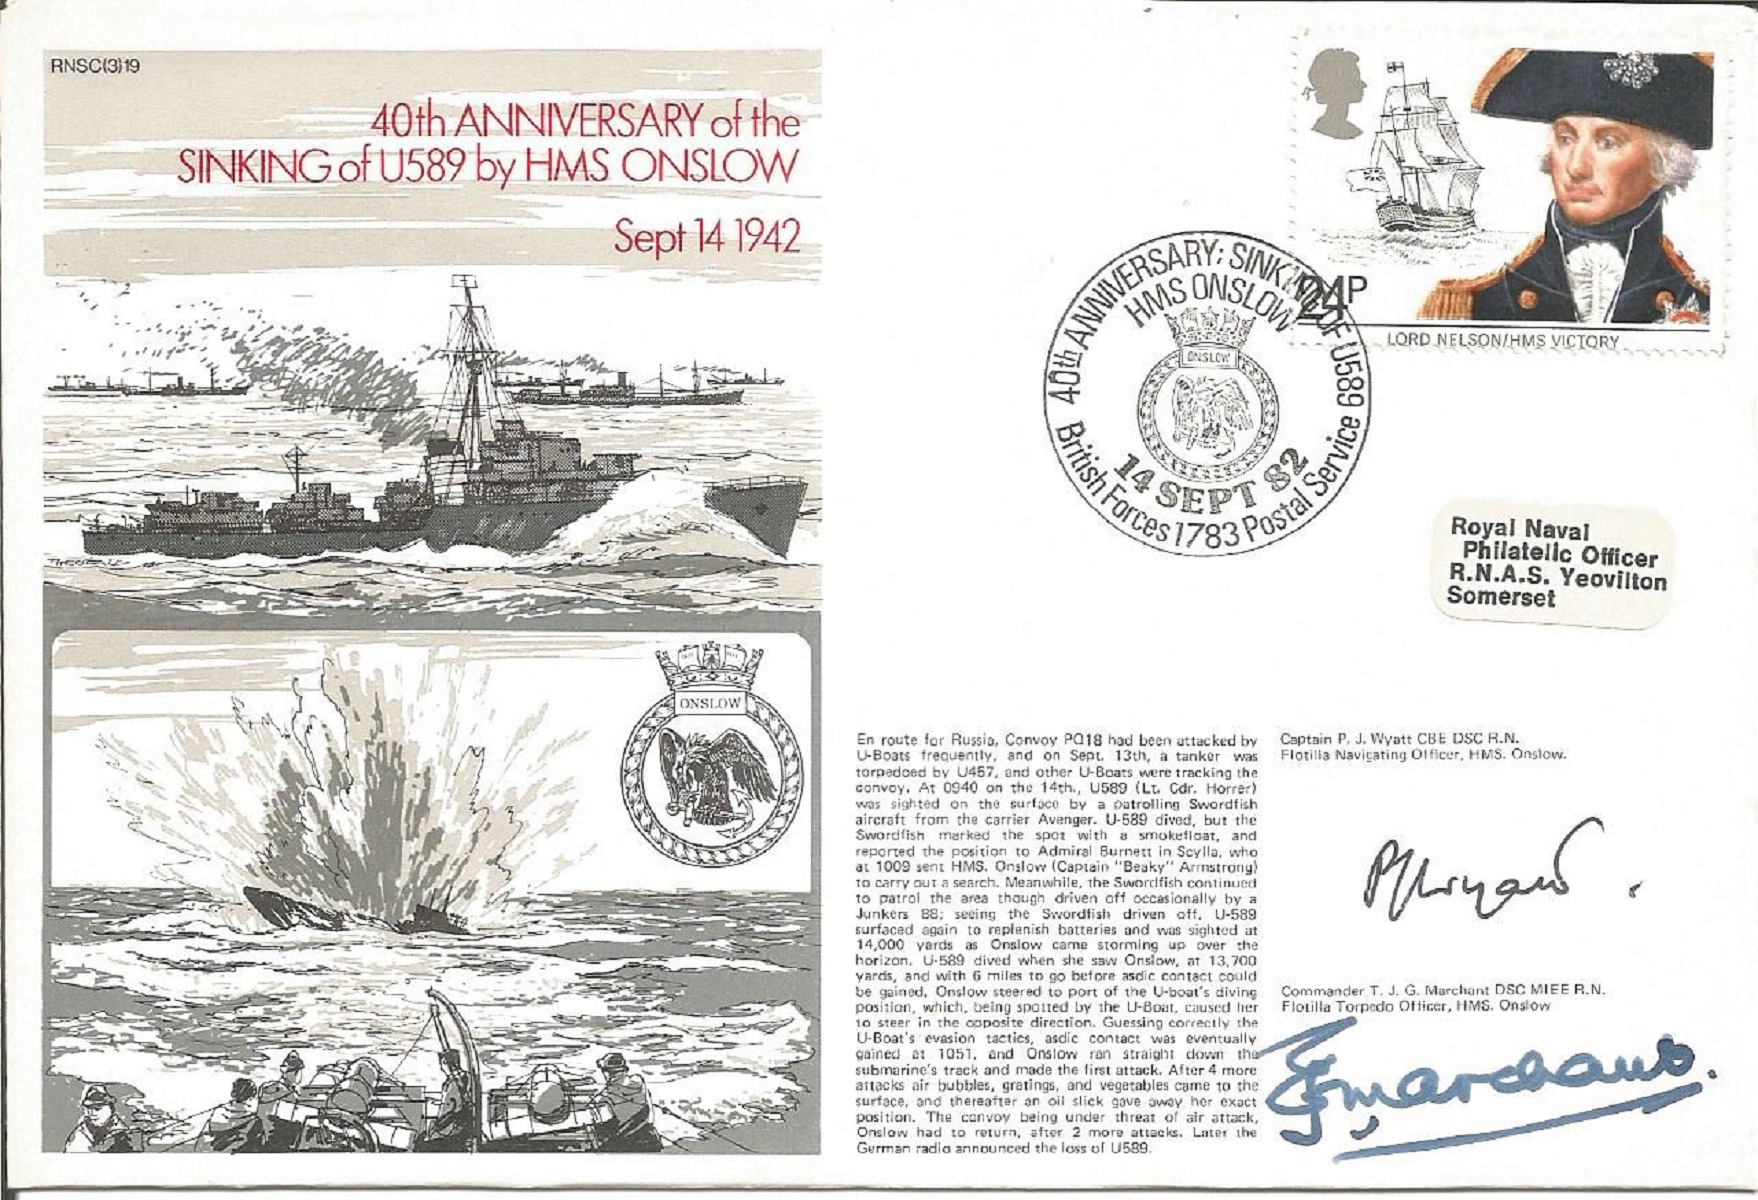 Captain P J Wyatt and Commander T J G Marchant signed RNSC(3)19 cover commemorating 40th Anniversary